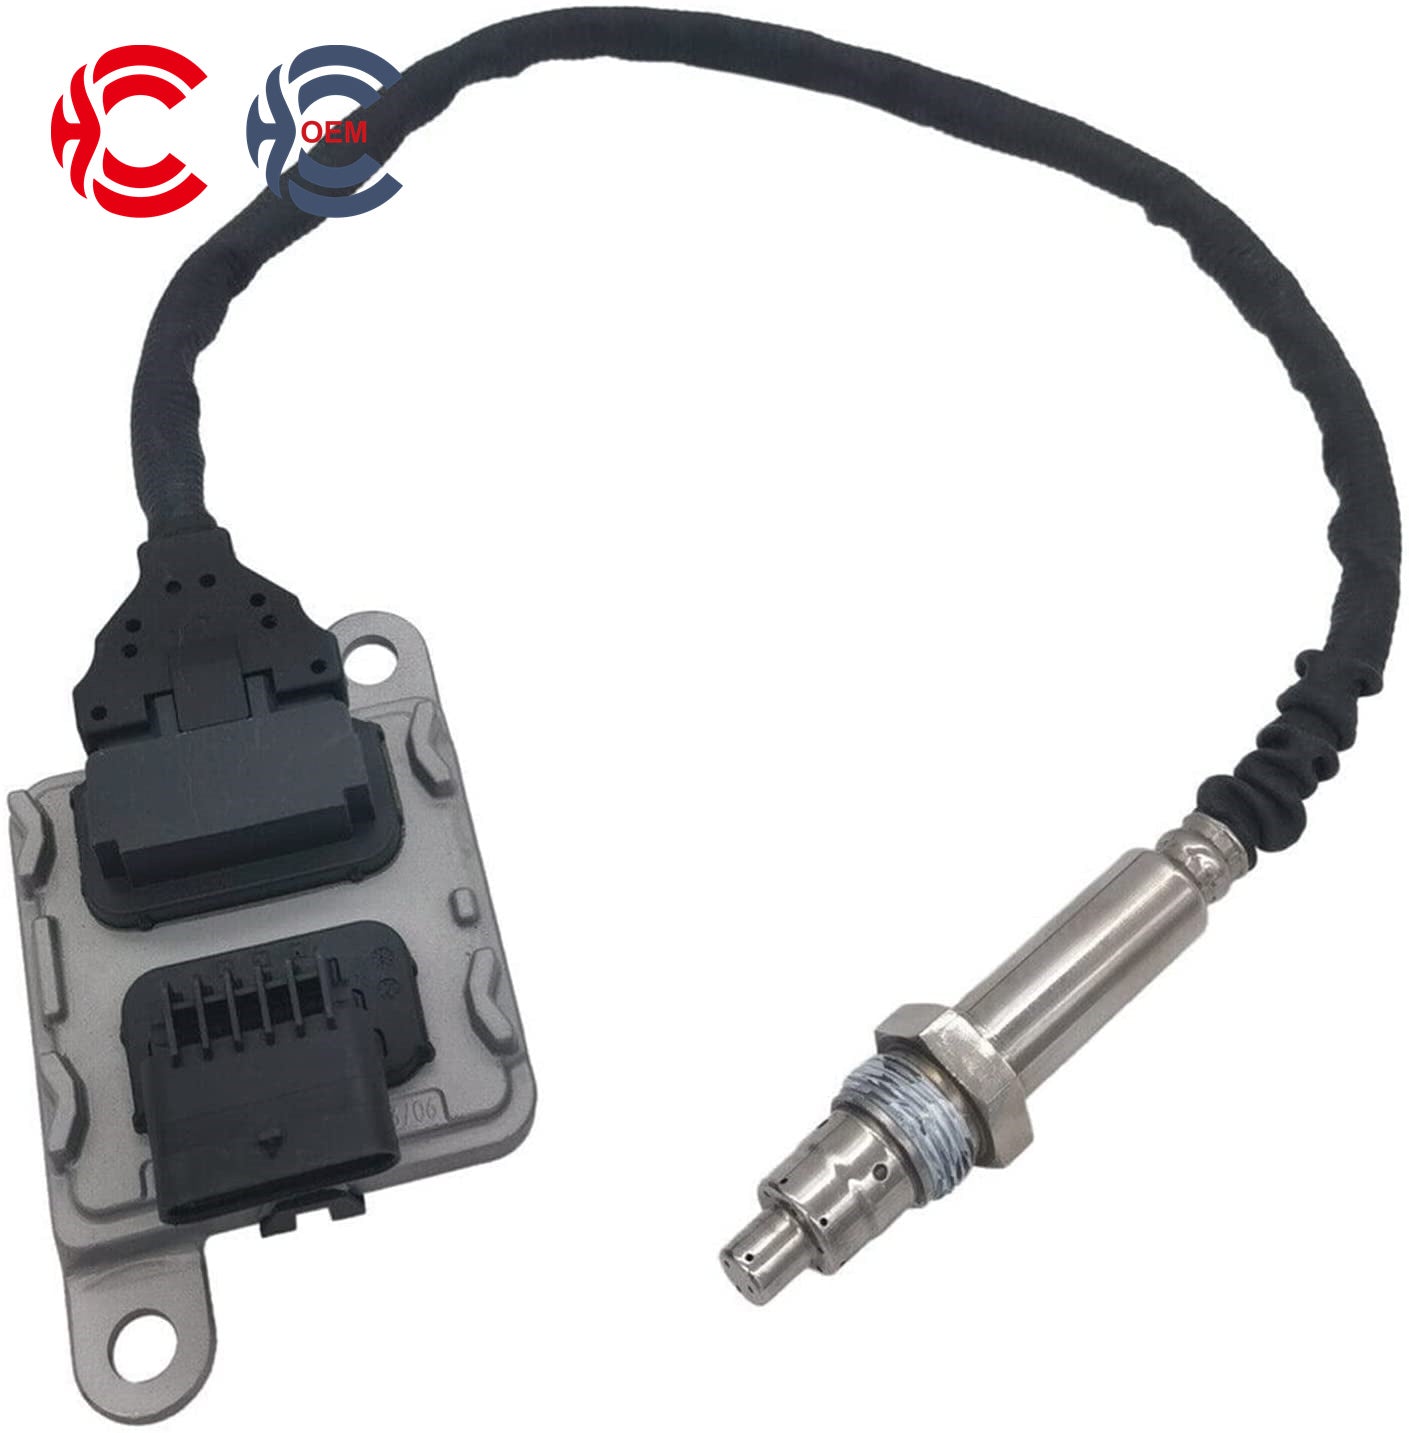 OEM: SNS 0418C 55512780Material: ABS metalColor: black silverOrigin: Made in ChinaWeight: 400gPacking List: 1* Nitrogen oxide sensor NOx More ServiceWe can provide OEM Manufacturing serviceWe can Be your one-step solution for Auto PartsWe can provide technical scheme for you Feel Free to Contact Us, We will get back to you as soon as possible.